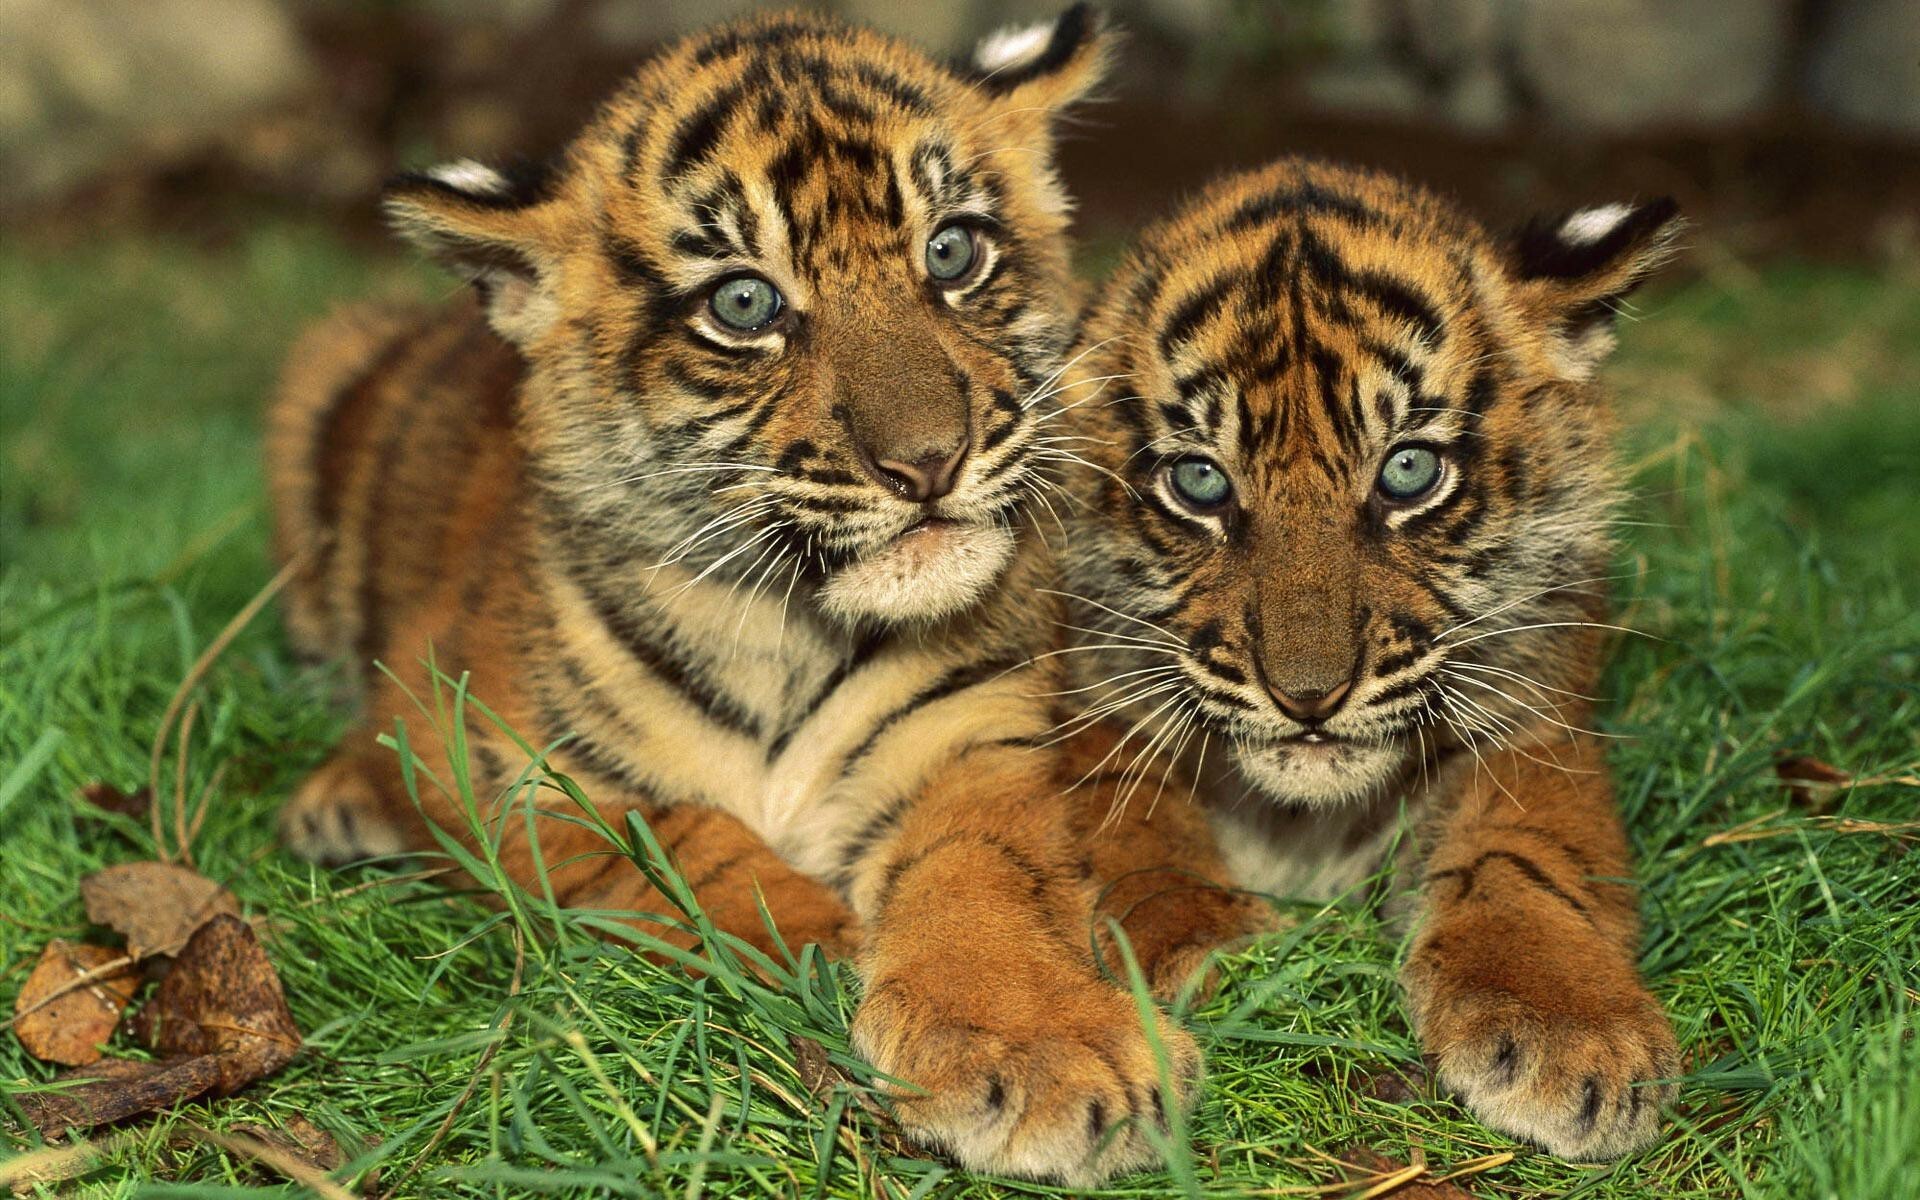 Tiger: Cubs stay with their mothers until they learn to hunt successfully, usually at about 18 to 24 months old. 1920x1200 HD Wallpaper.